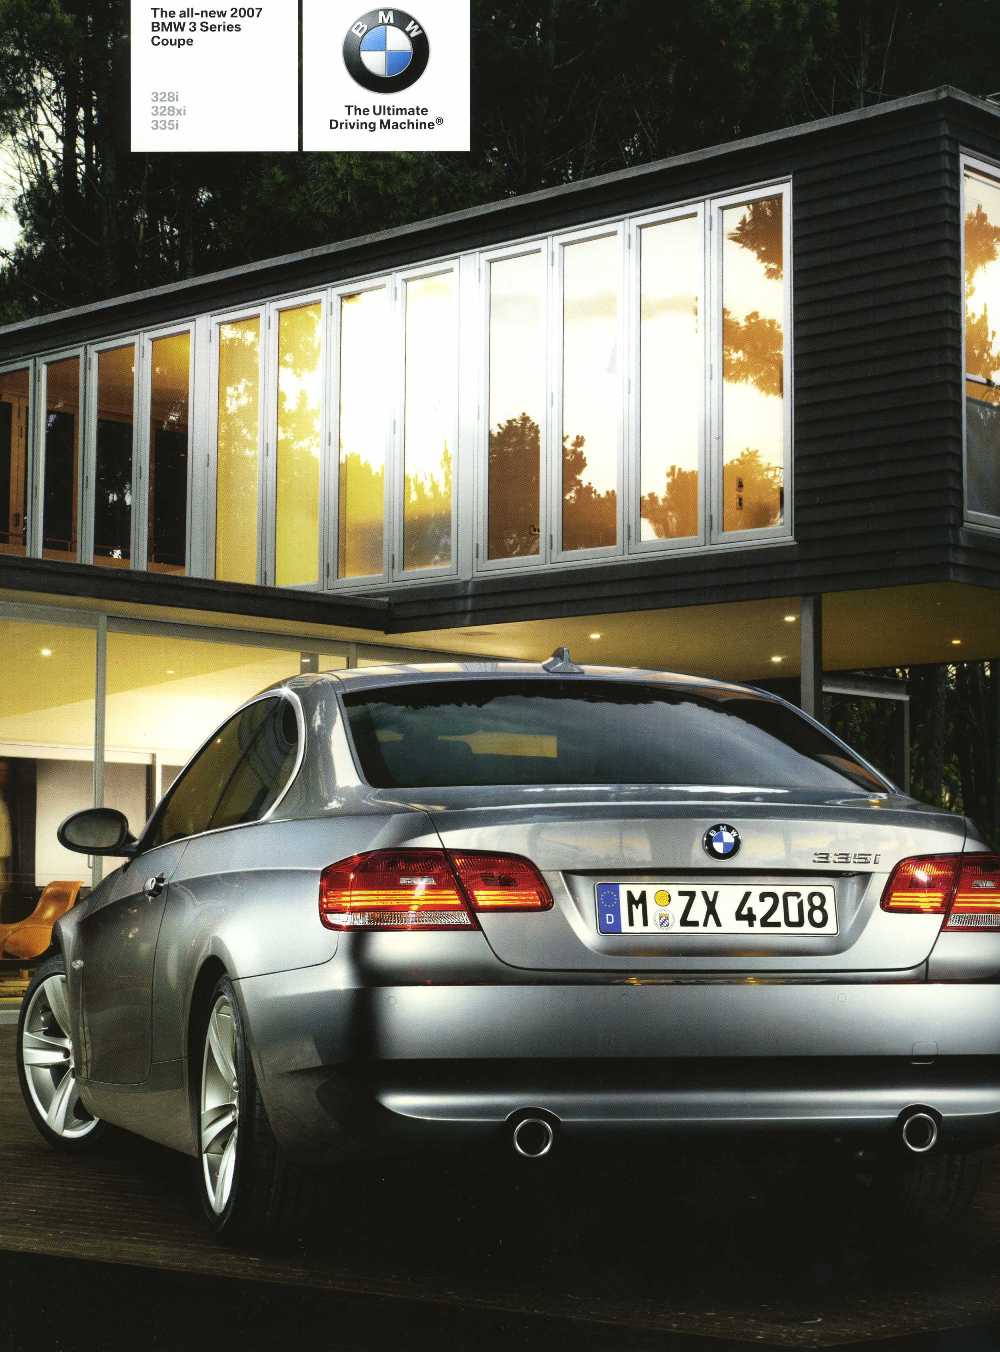 Brochure - The all-new 2007 BMW 3 Series Coupe 328i 328xi 335i - E92 Brochure (2nd version)